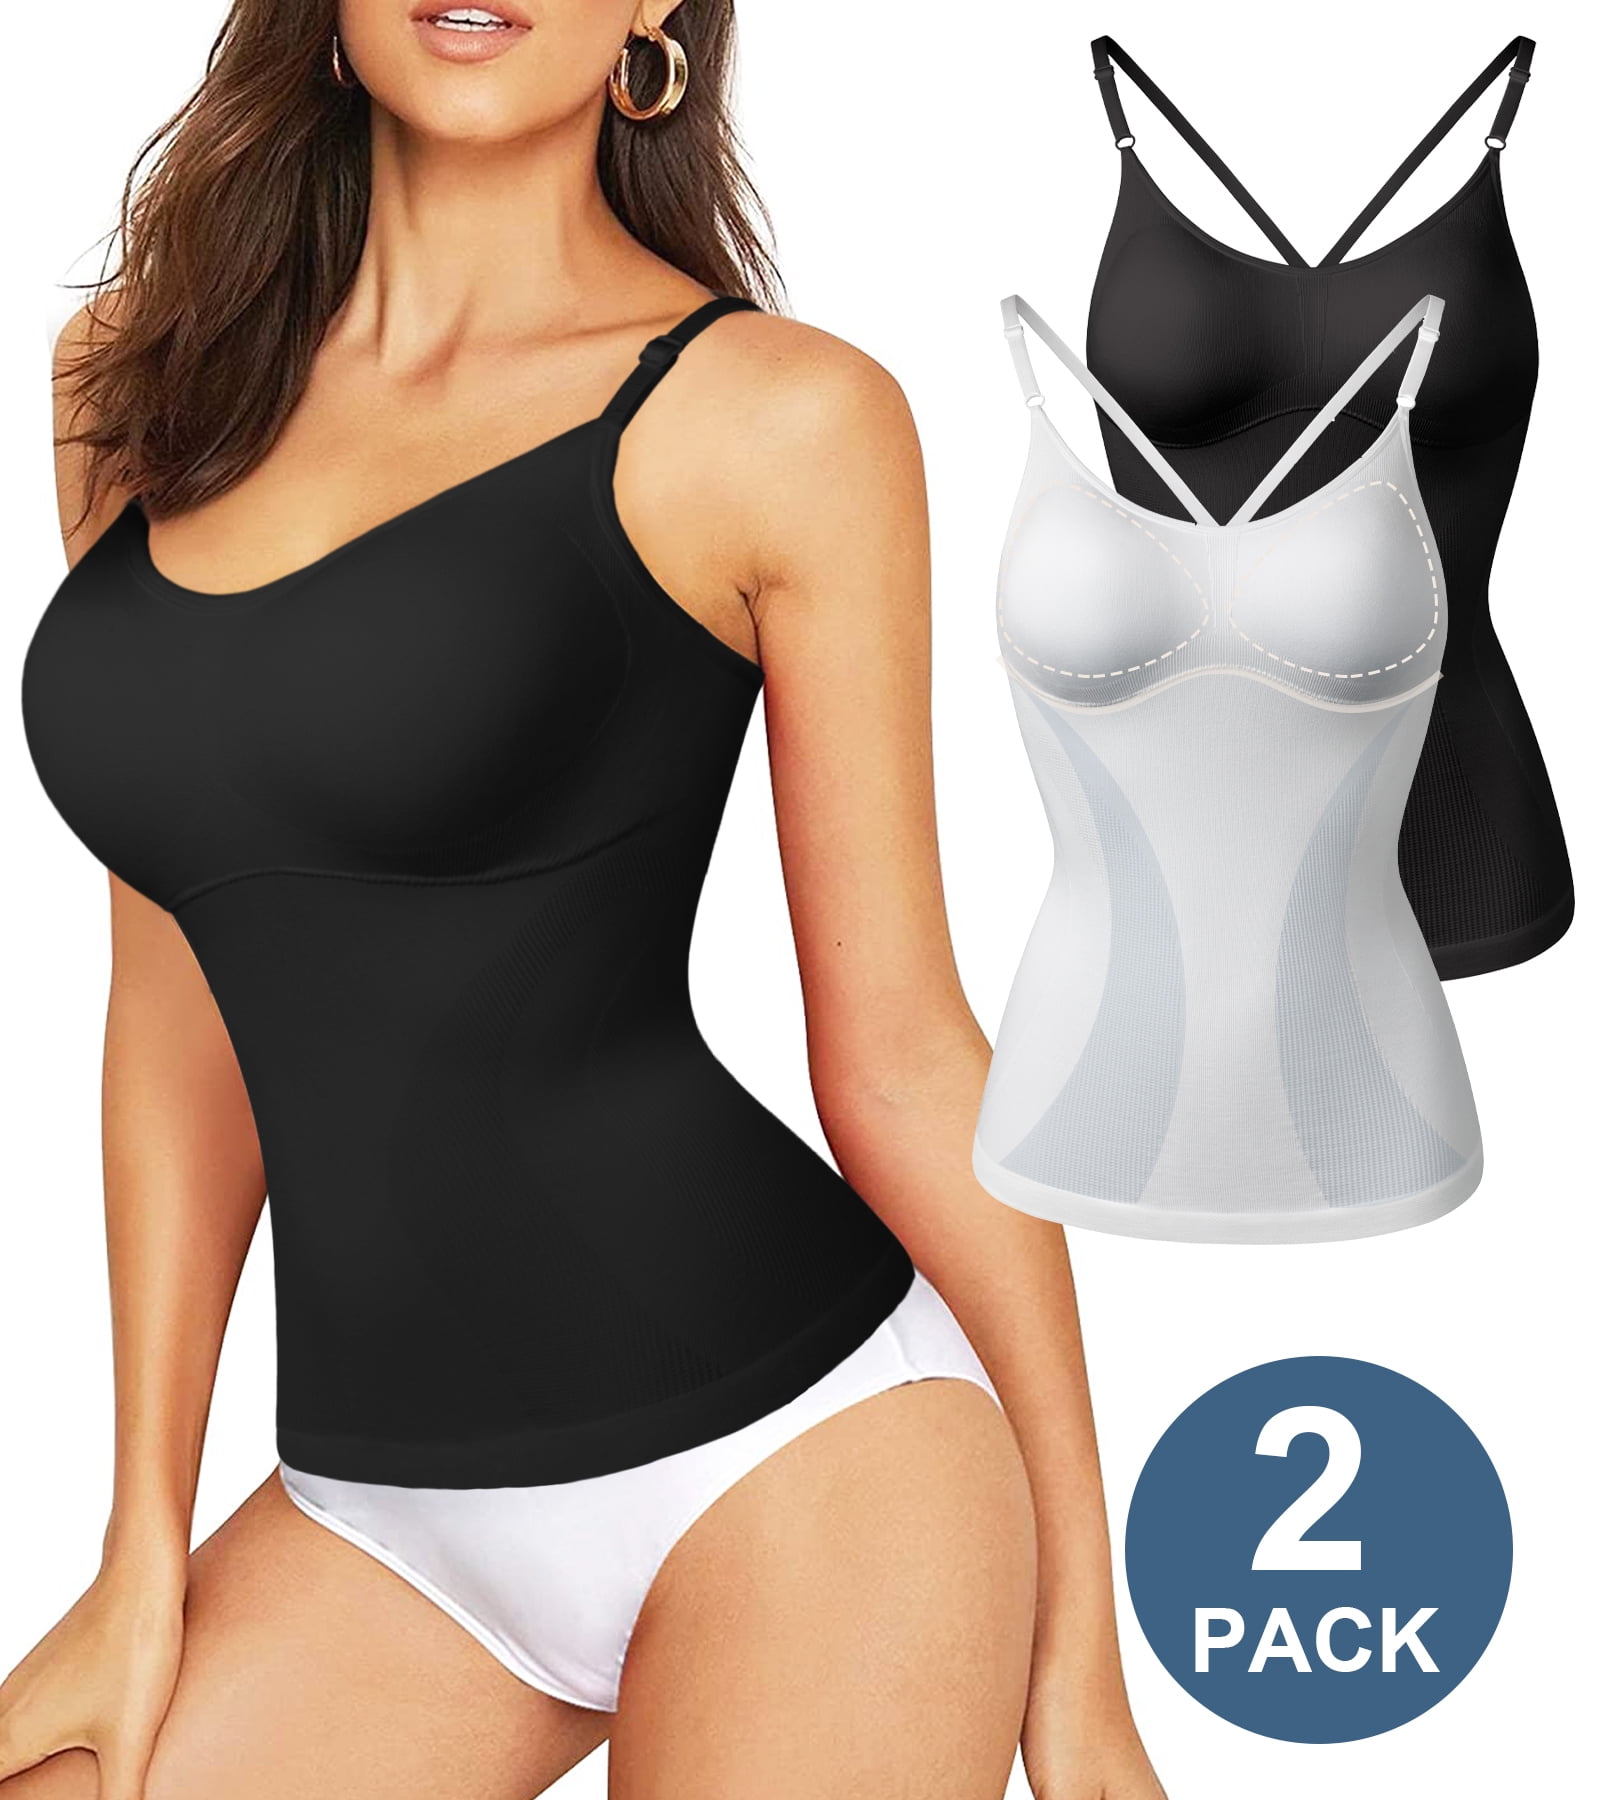 Womens Shapewear Camisole Tops -Scoop Neck Compression Cami Tops Body  Shape-Tummy and Waist Control Seamless Body Shapewear Camisole 